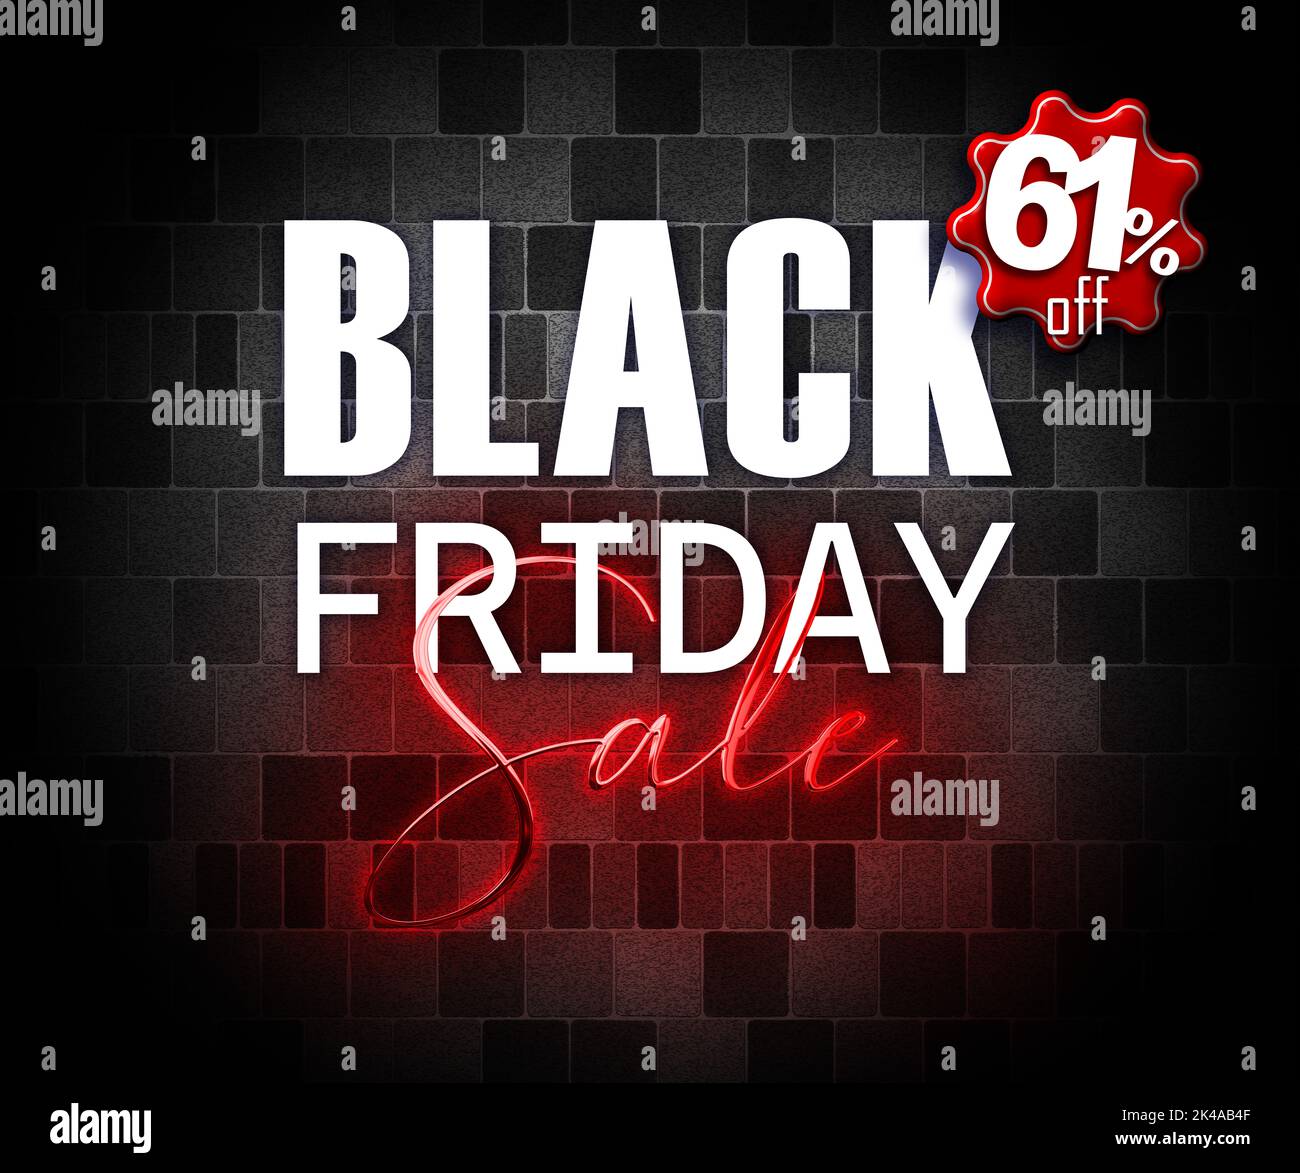 illustration with 3d elements black friday promotion banner 61 percent off sales increase Stock Photo